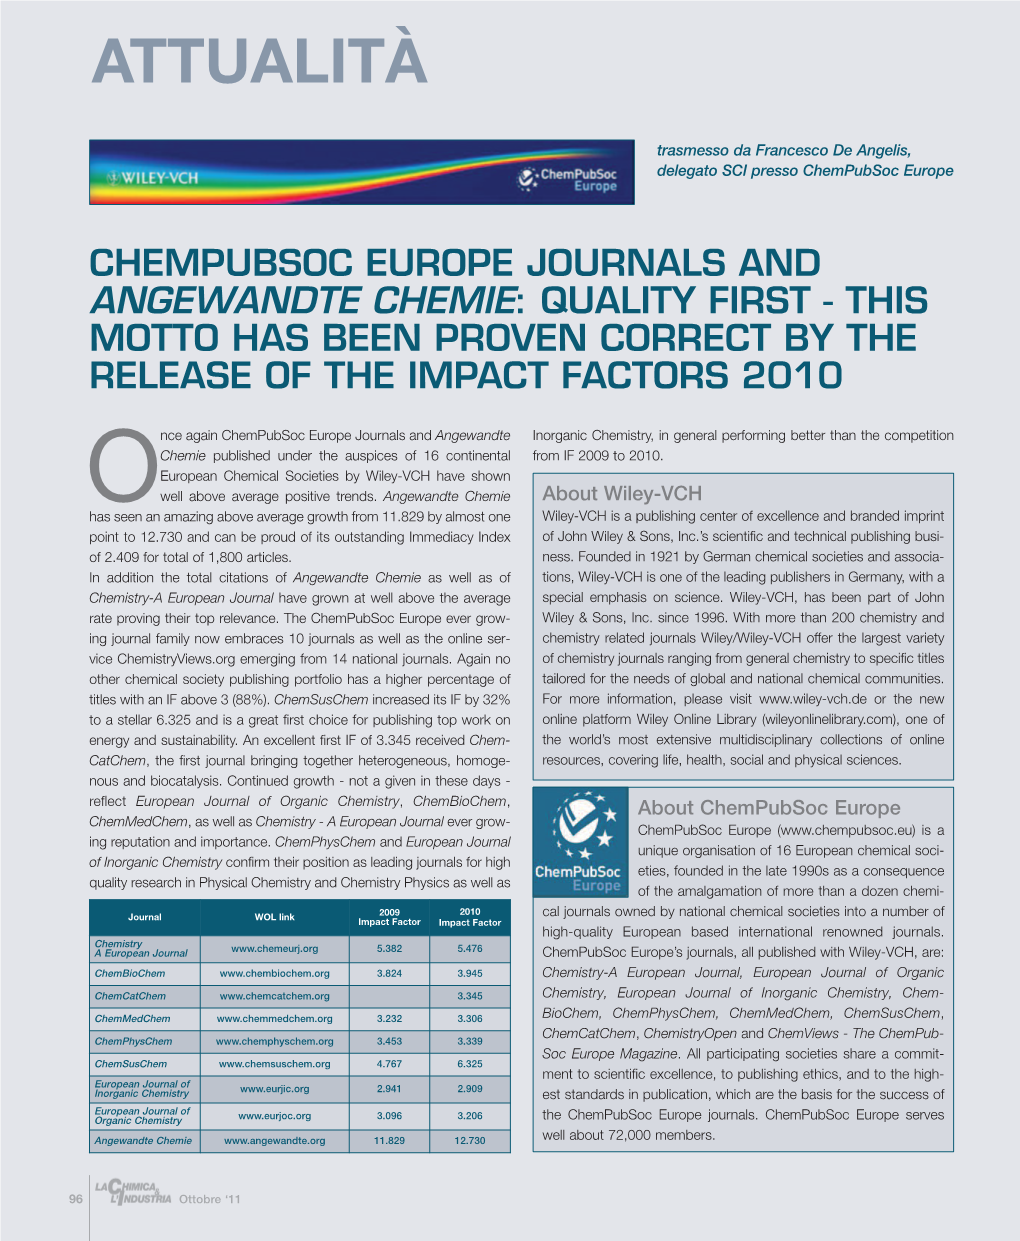 Chempubsoc Europe Journals and Angewandte Chemie : Quality First - This Motto Has Been Proven Correct by the Release of the Impact Factors 2010